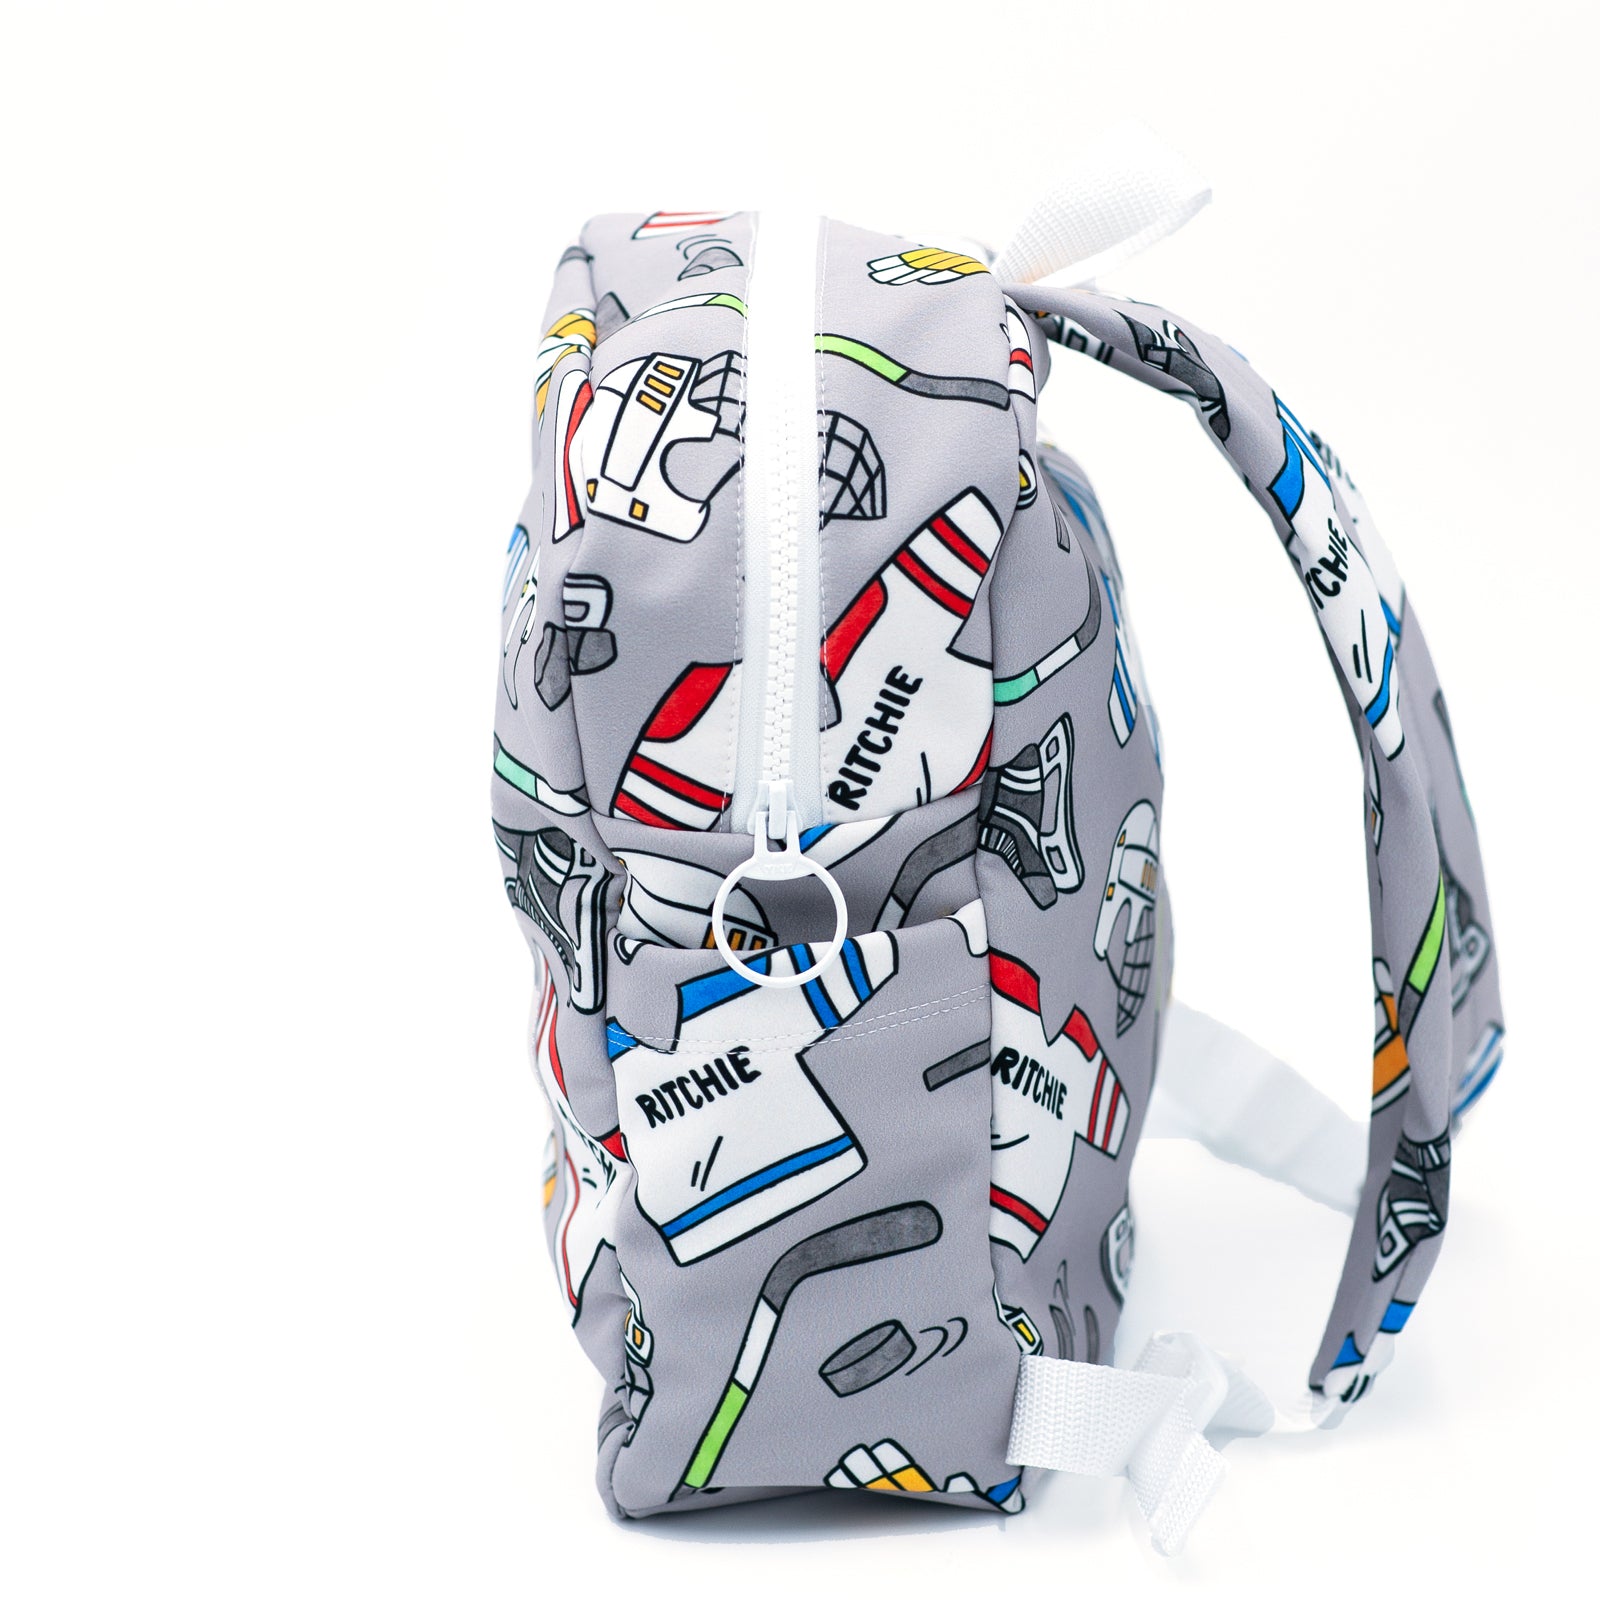 Personalized DayPack